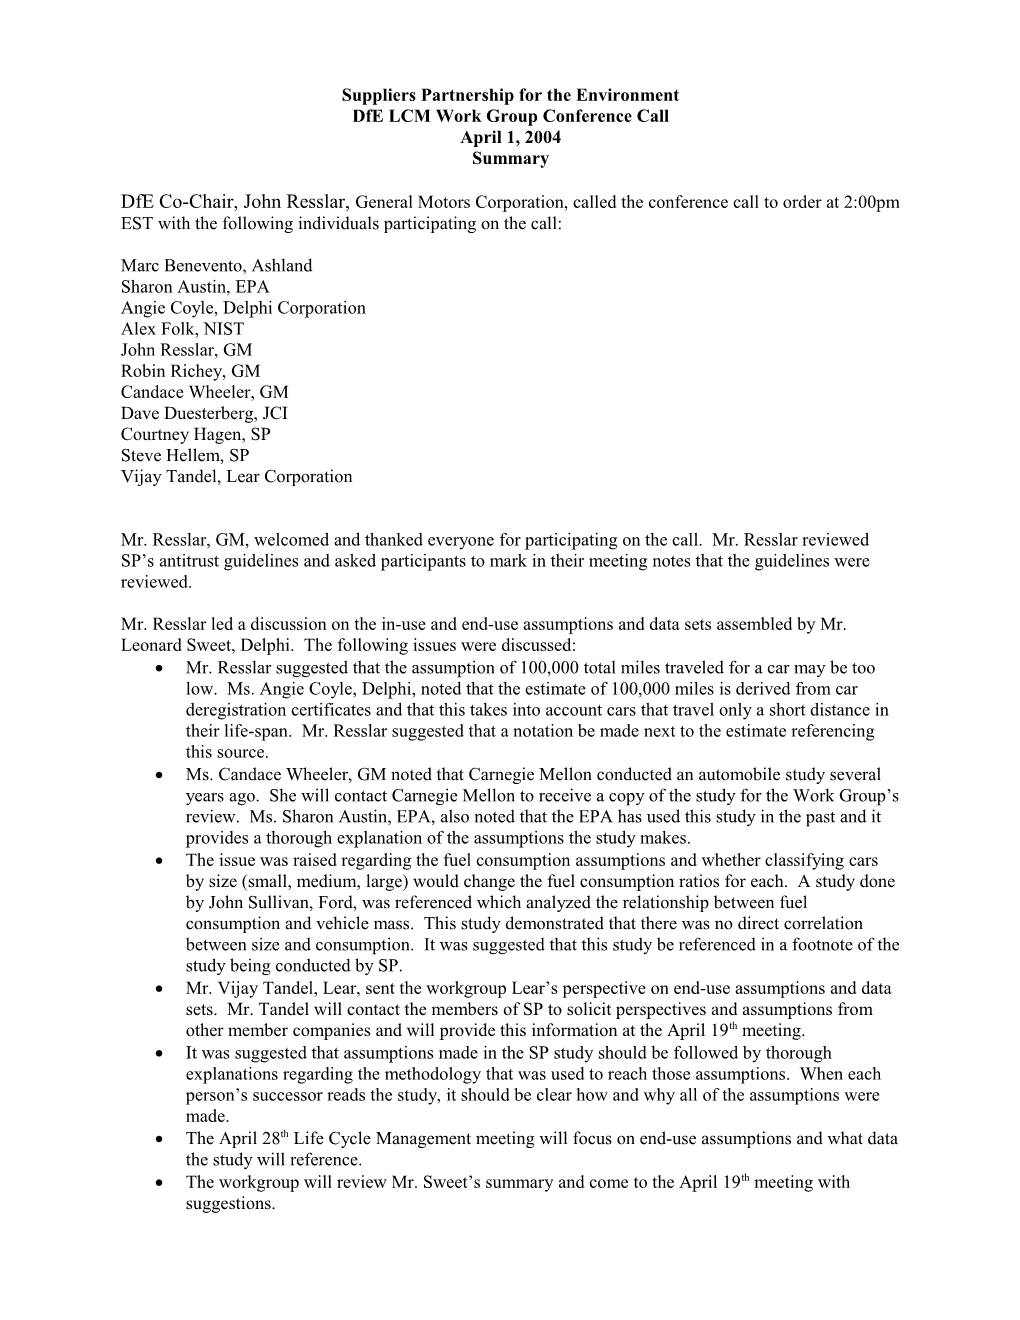 Notes from March 1, 2004 Suppliers Partnership for the Environment Dfe Workgroup Meeting